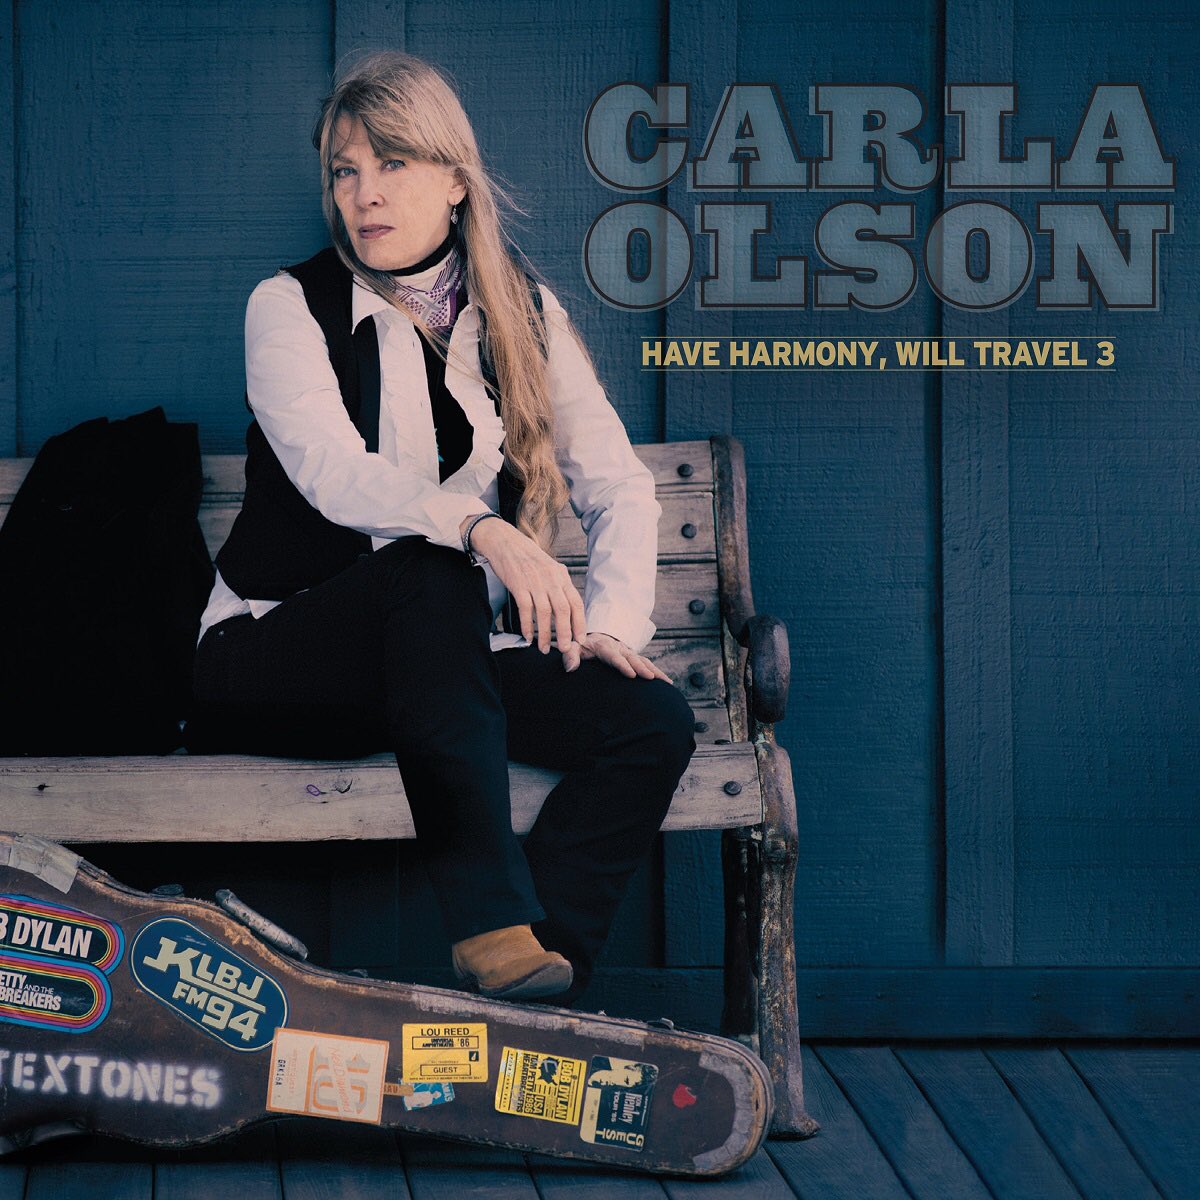 Thanks to the following FM stations for officially adding tracks from Carla’s new album “Have Harmony, Will Travel 3” to their playlists last week (in addition to the 143 stations in the US already spinning and charting the album.)

KDUR KOCF KUBU KVNF 
WESU WHRW WOJB